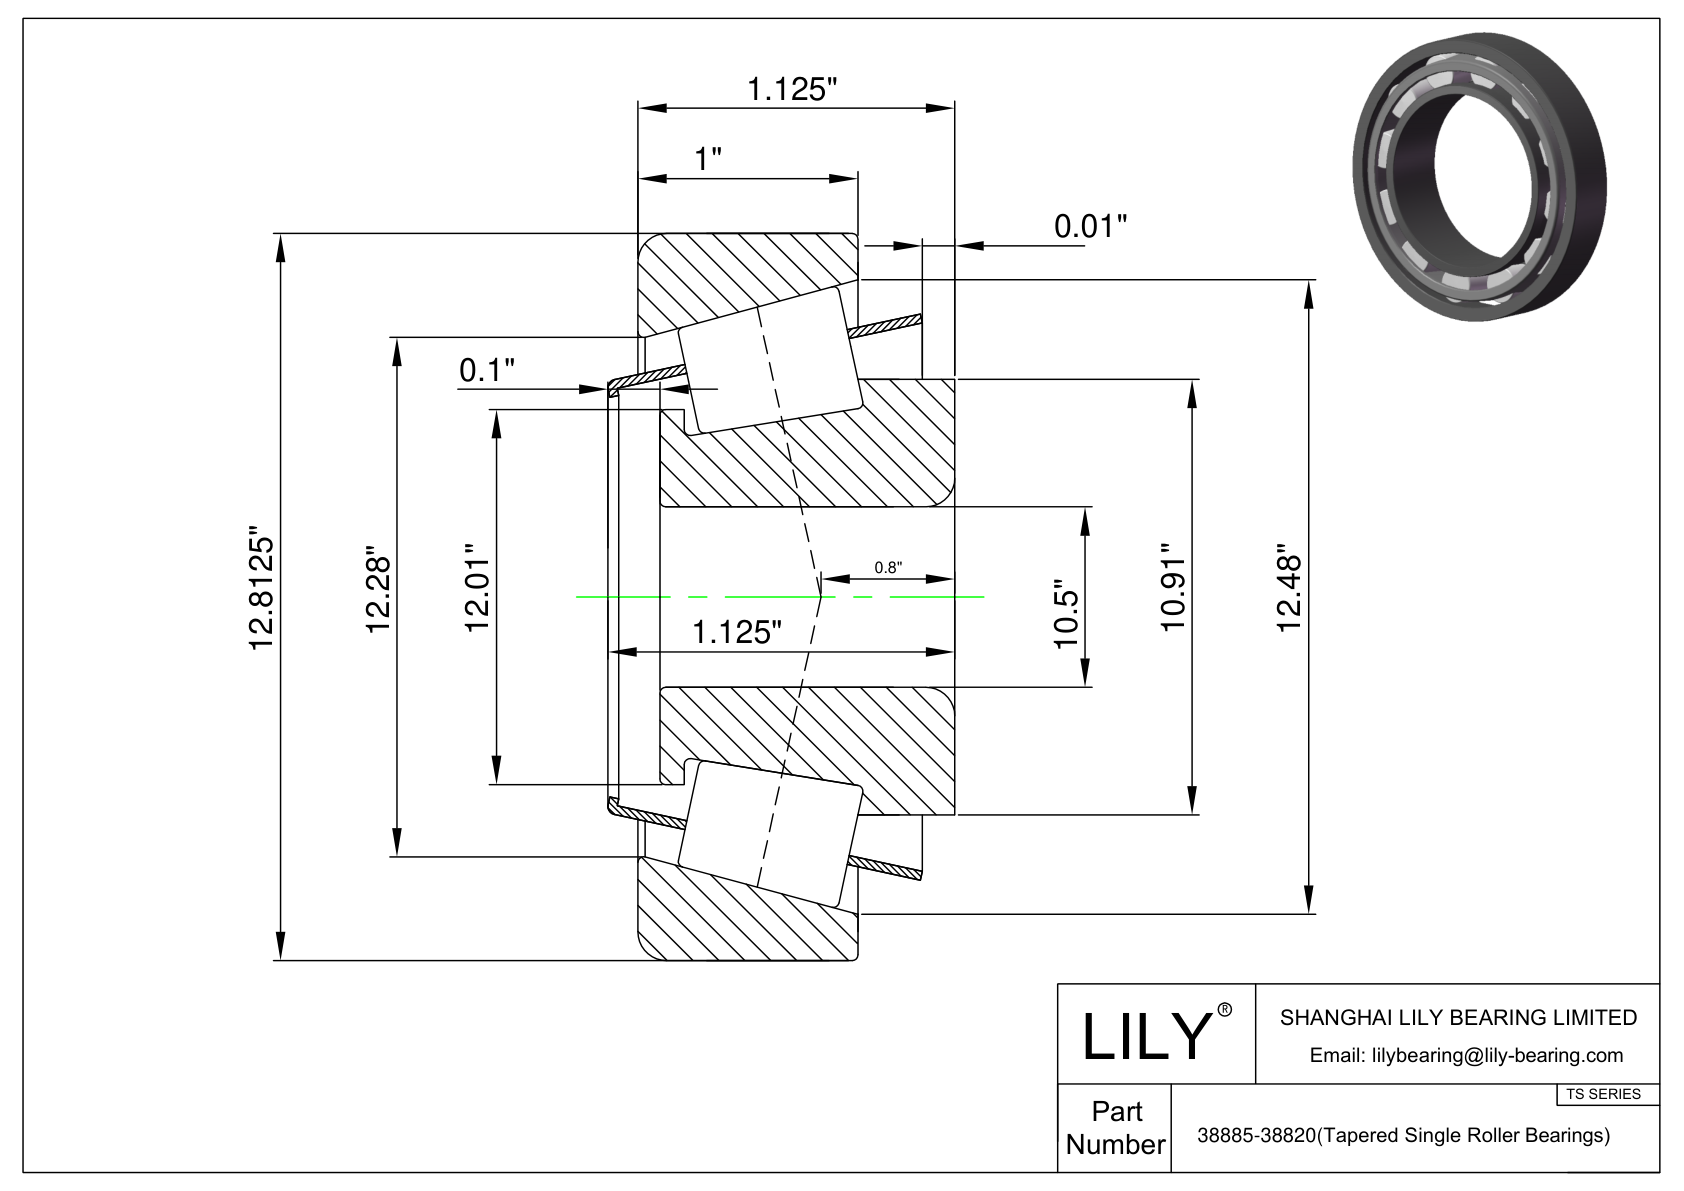 38885-38820 TS (Tapered Single Roller Bearings) (Imperial) cad drawing